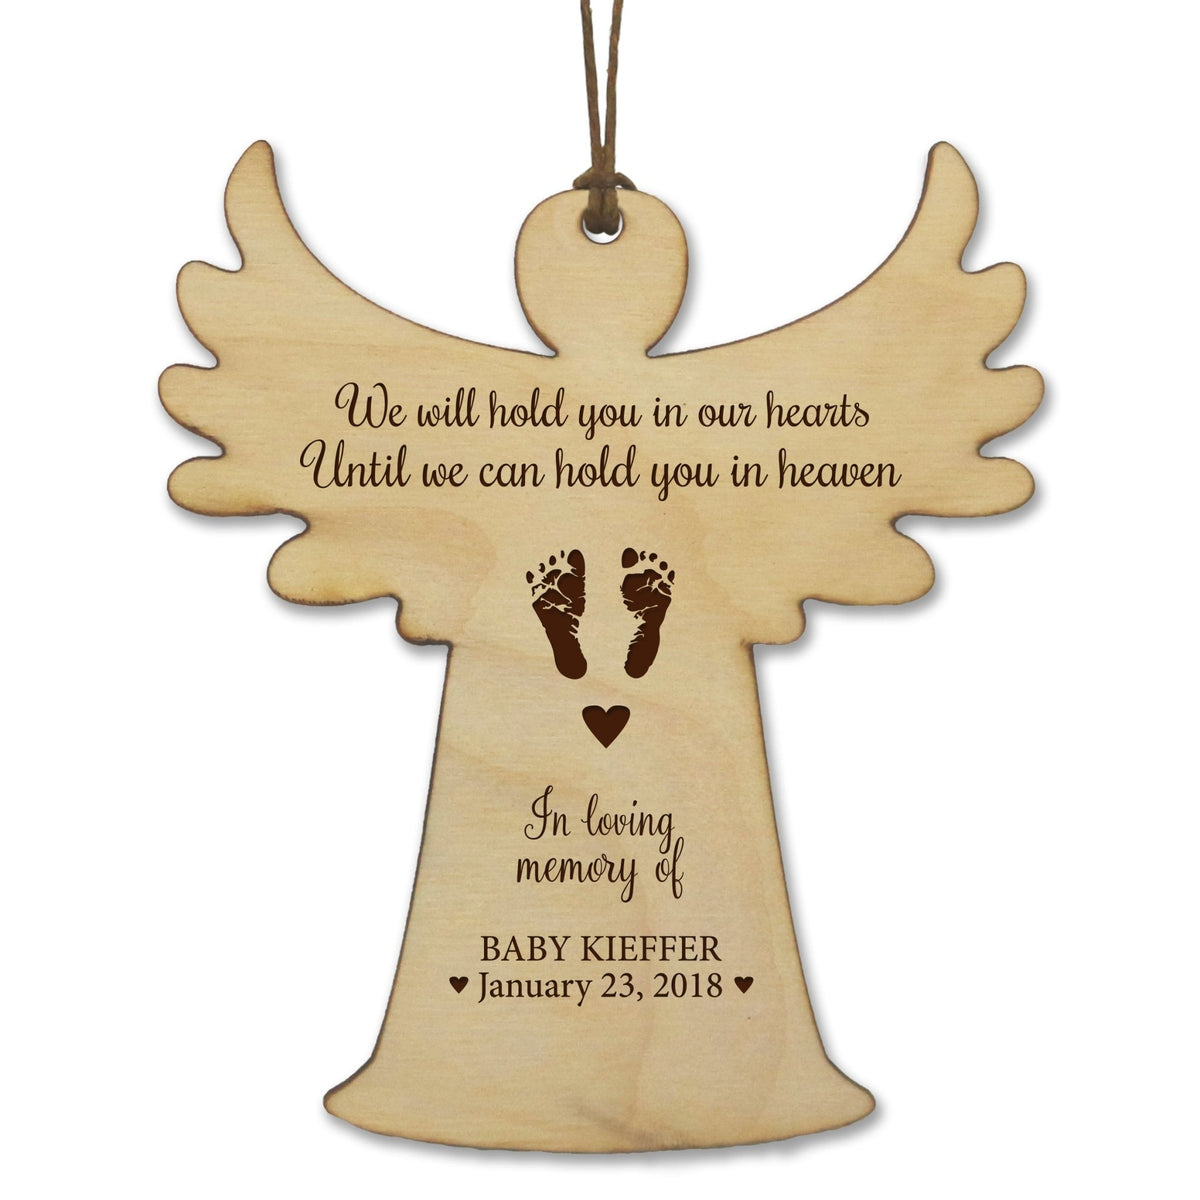 Engraved Memorial Ornament for Loss of Loved One - Hold You In Our Hearts - LifeSong Milestones